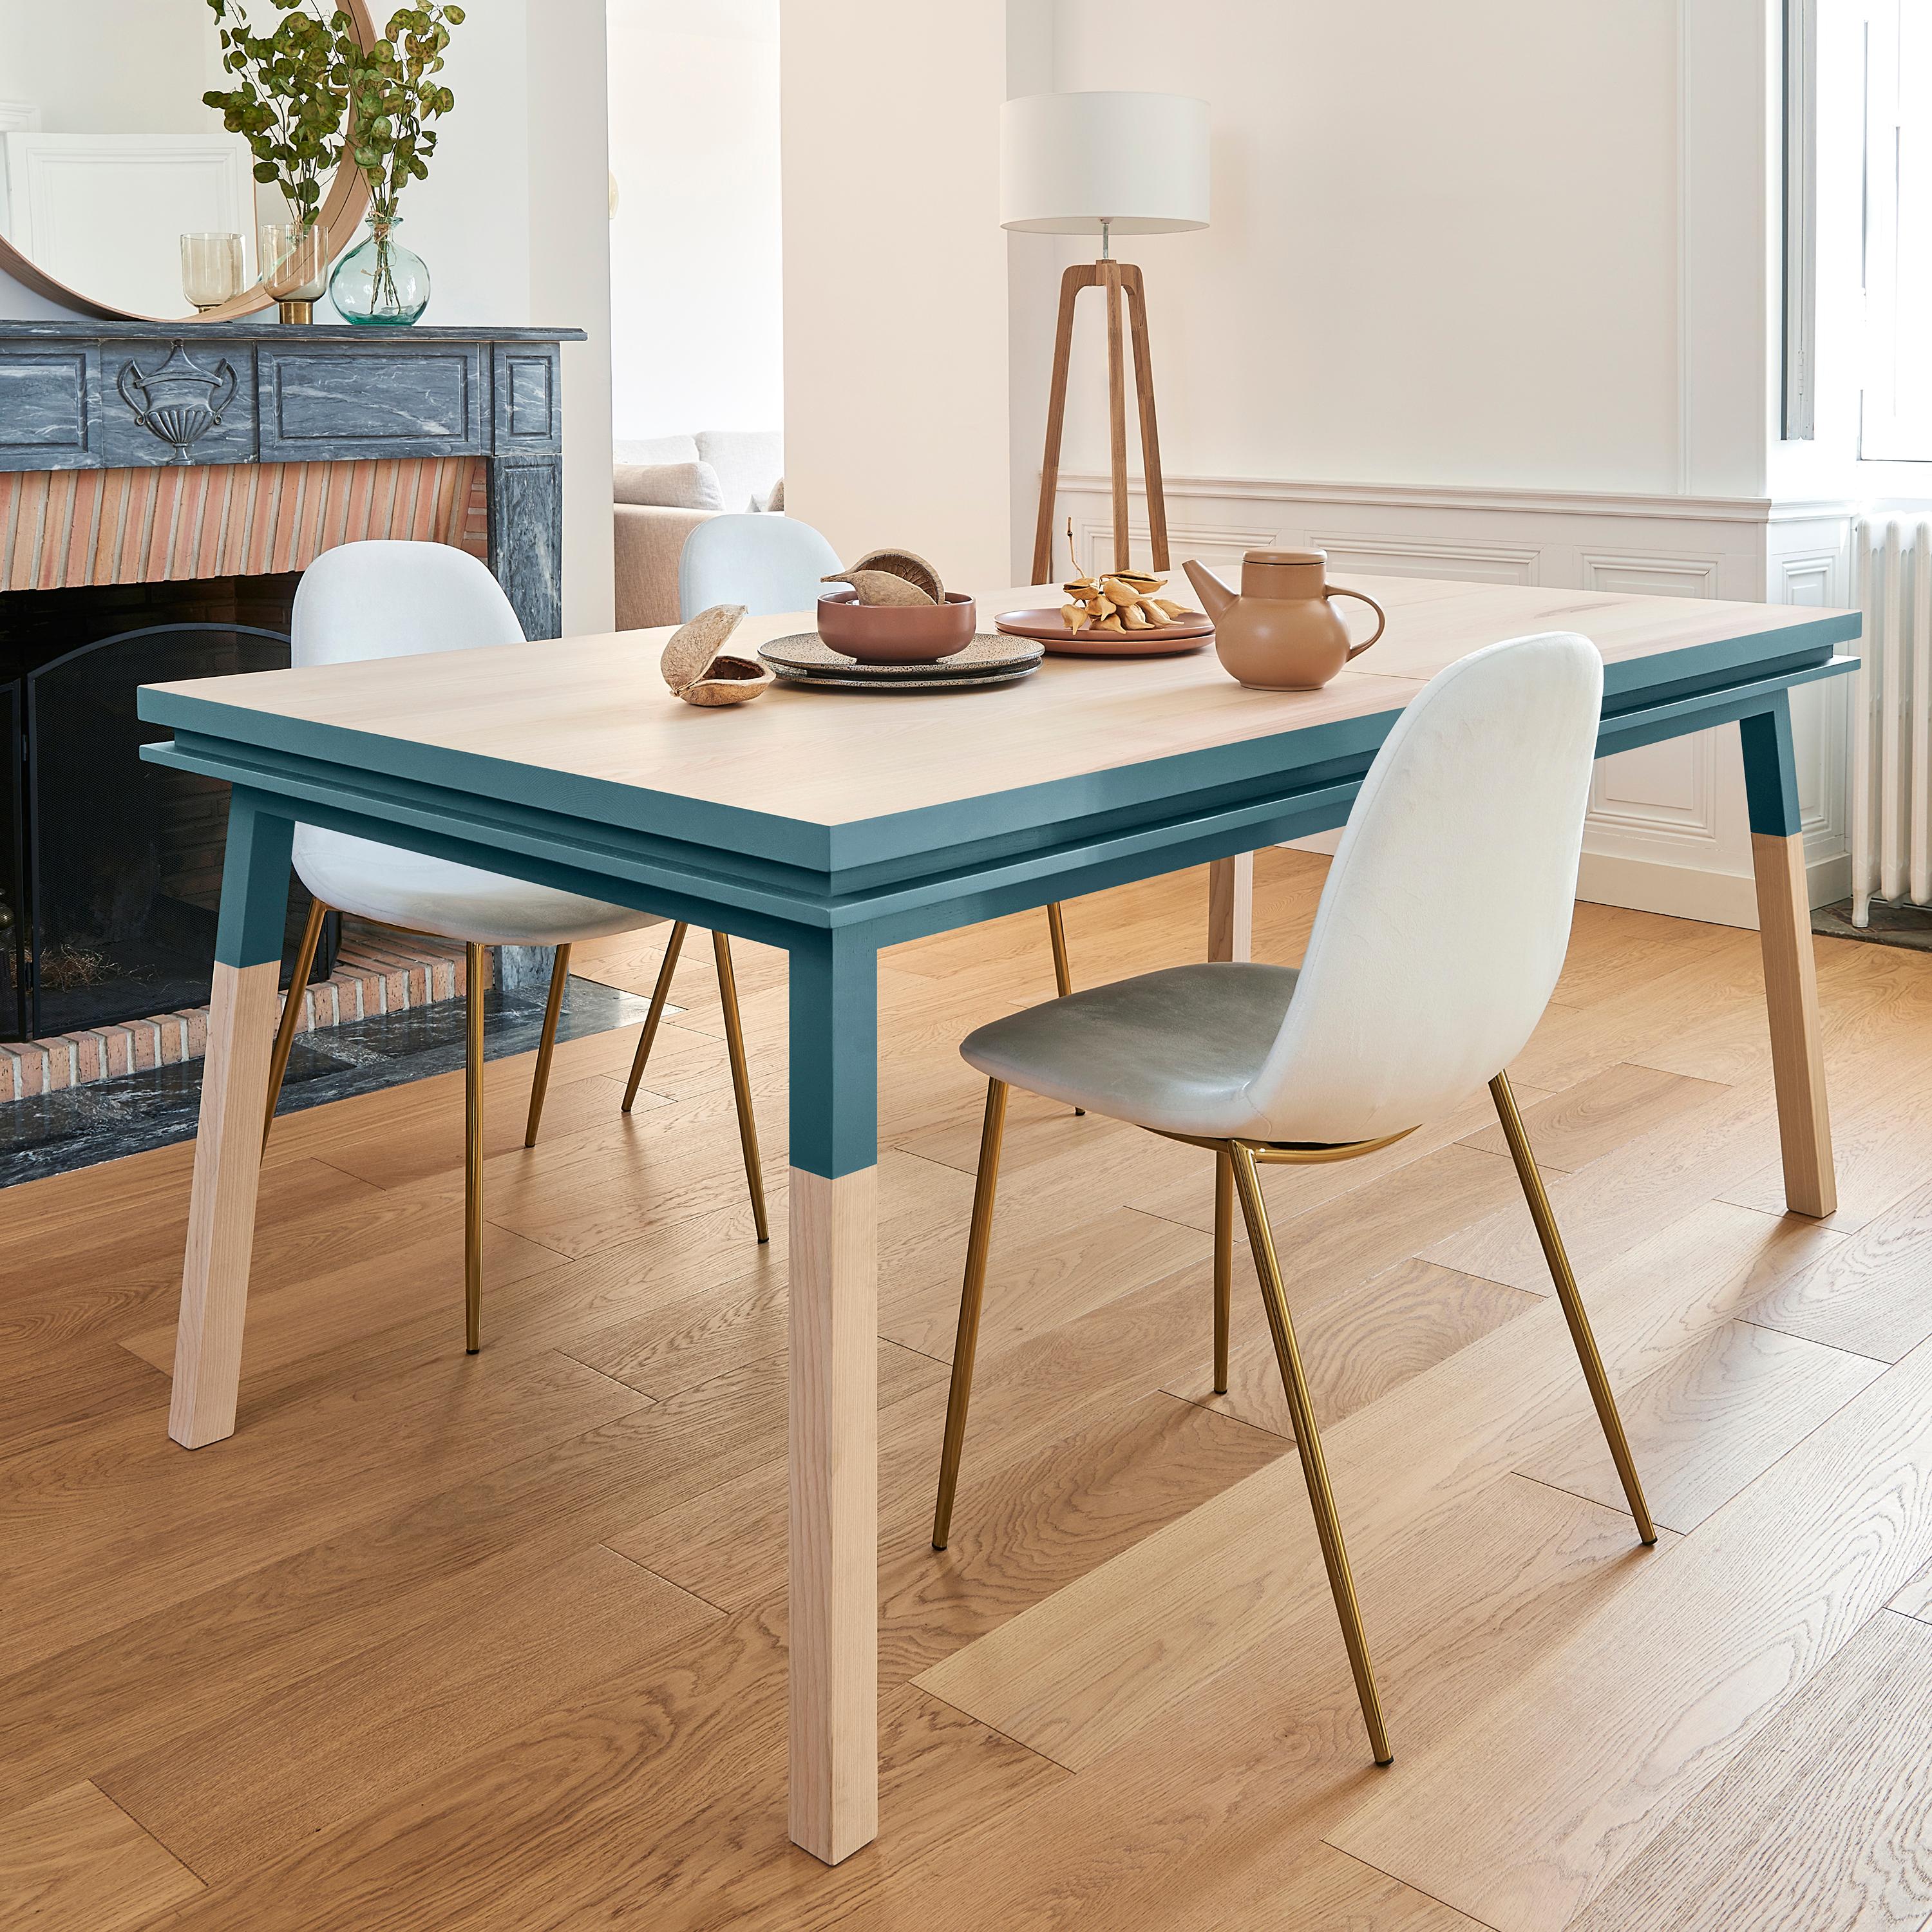 Sea Blue Extensible Design Table, 100% Solid Wood and Customizable In New Condition For Sale In Landivy, FR